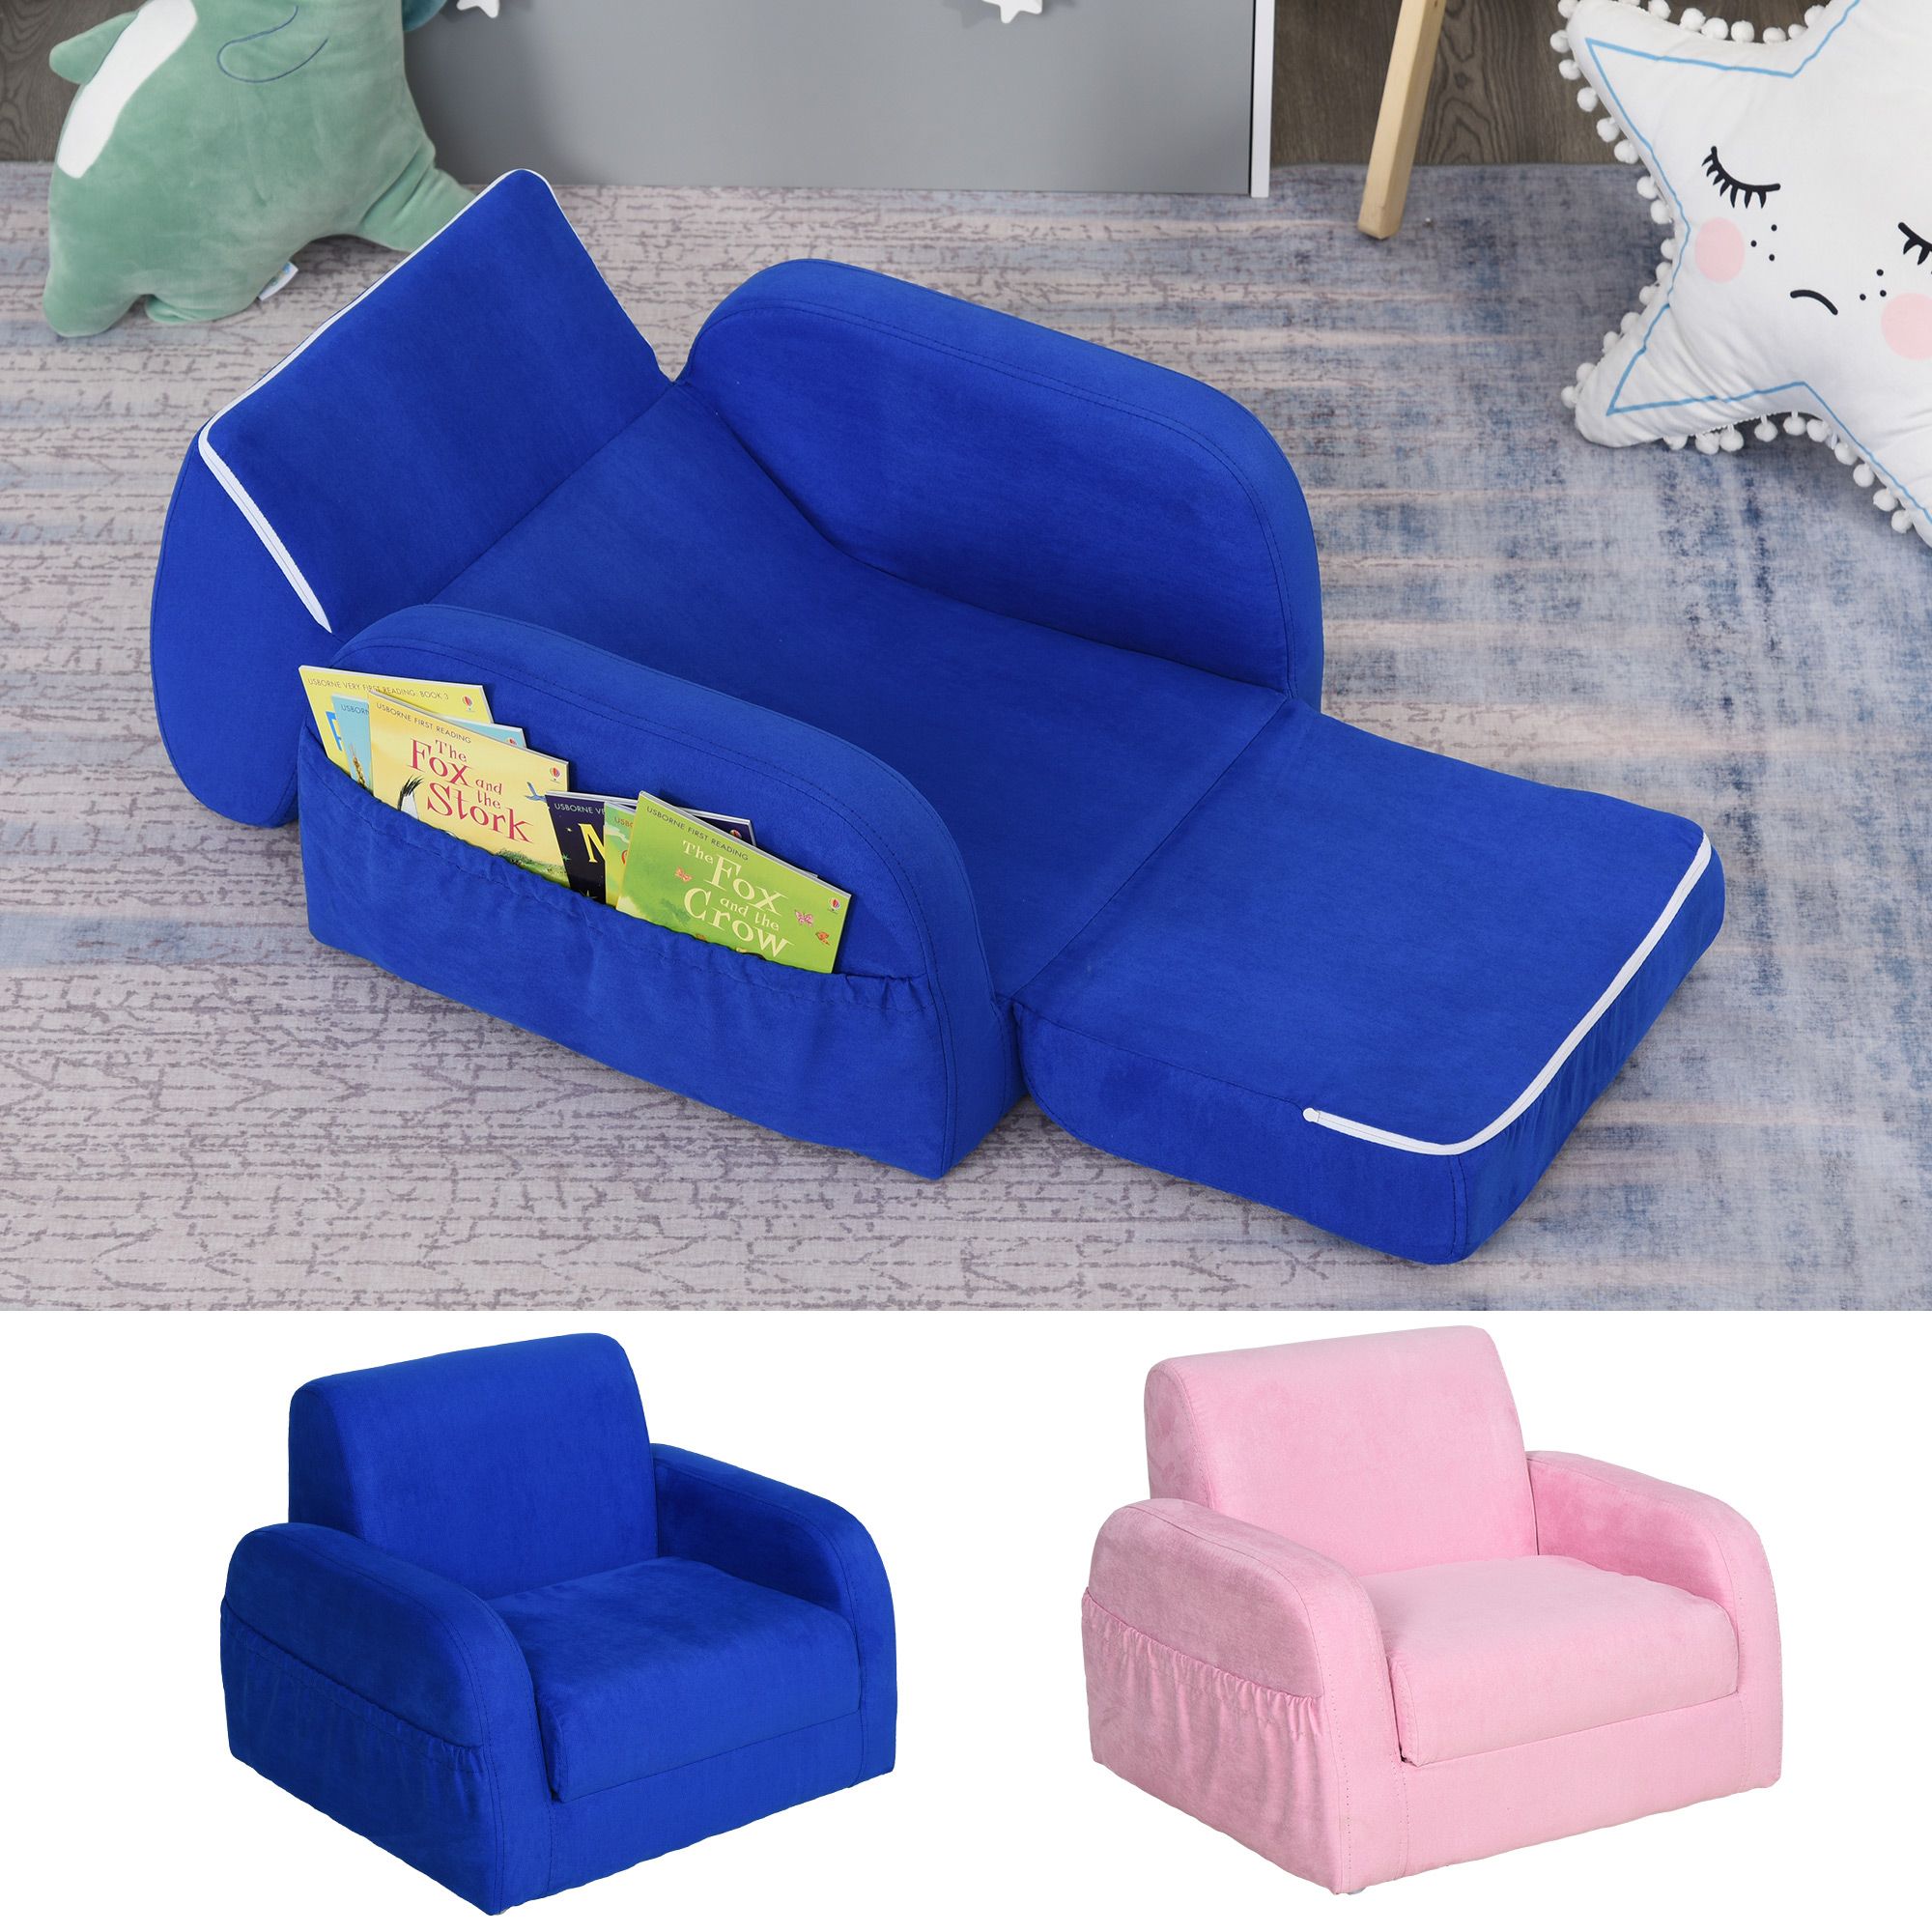 2 In 1 Kids Sofa Armchair Chair Fold Out Flip Open Baby Bed Couch Regarding Children's Sofa Beds (Gallery 3 of 20)